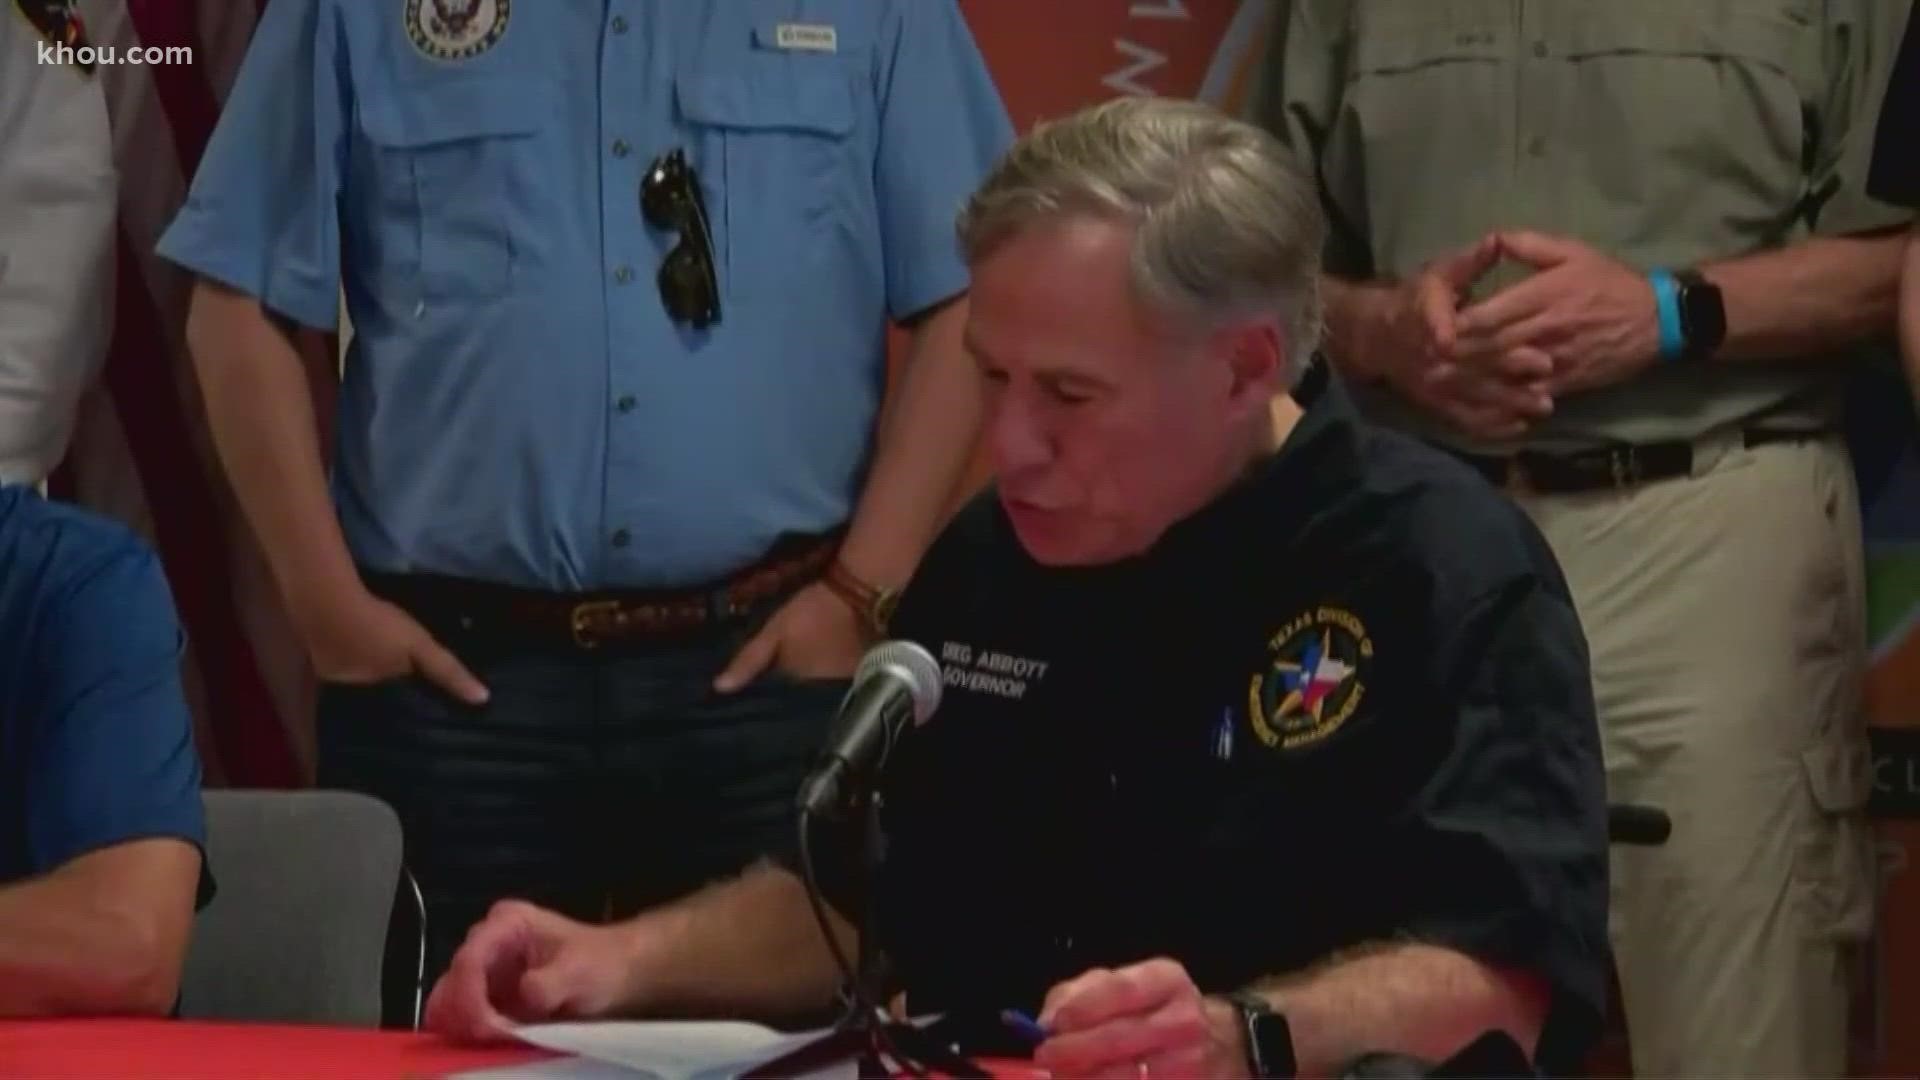 Texas Gov. Greg Abbott on Thursday spoke with the media about Hurricane Laura after touring damage in East Texas.